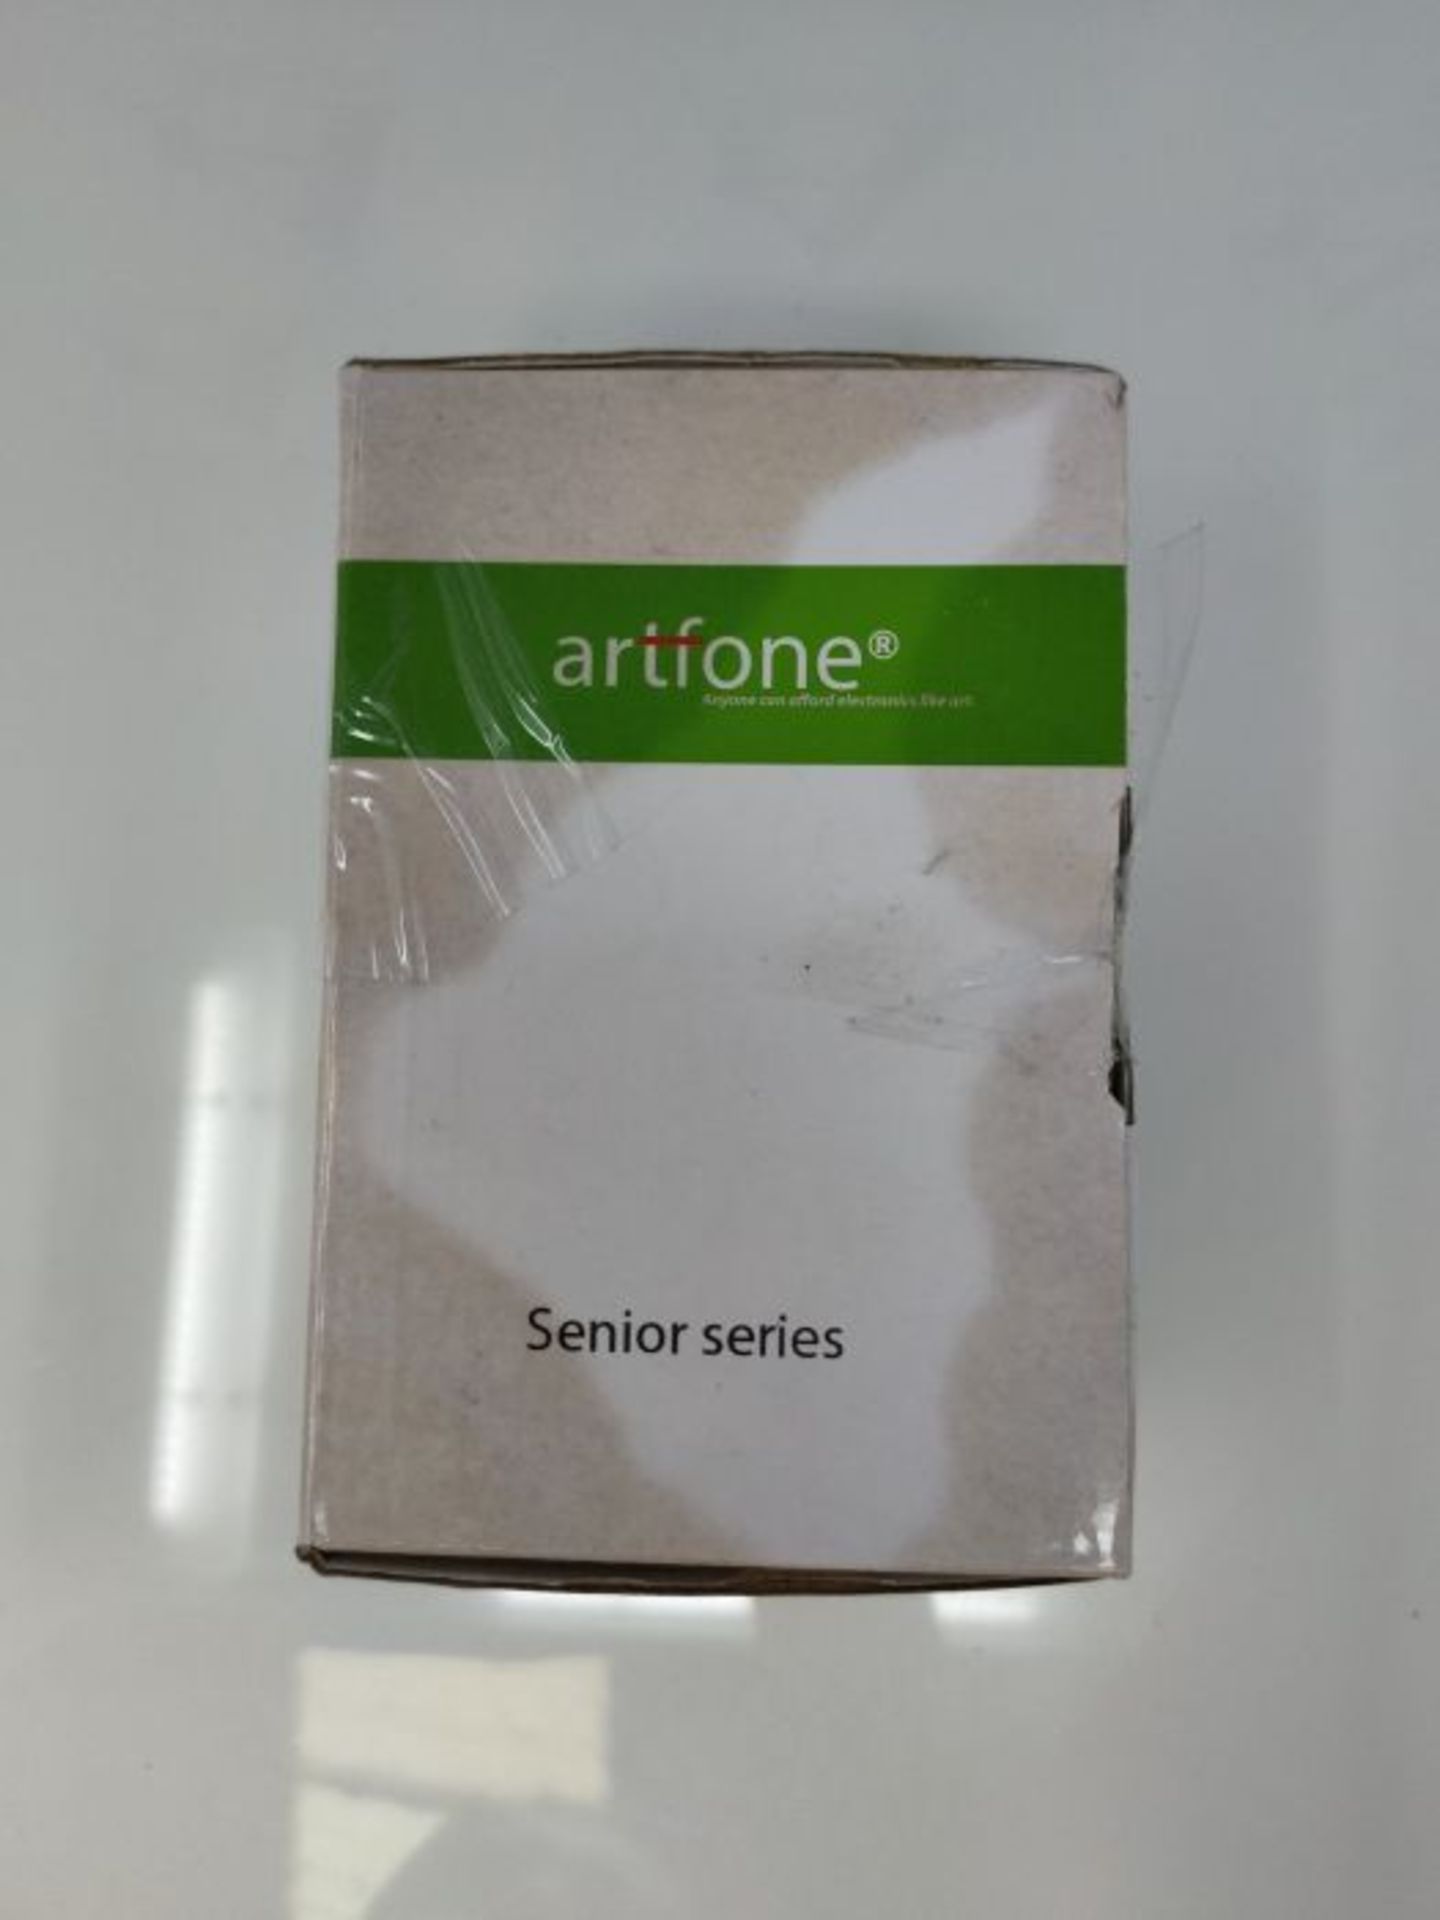 Mobile Phone for Elderly People, artfone 1400mAh Battery Big Button Mobile Phones Dual - Image 2 of 3